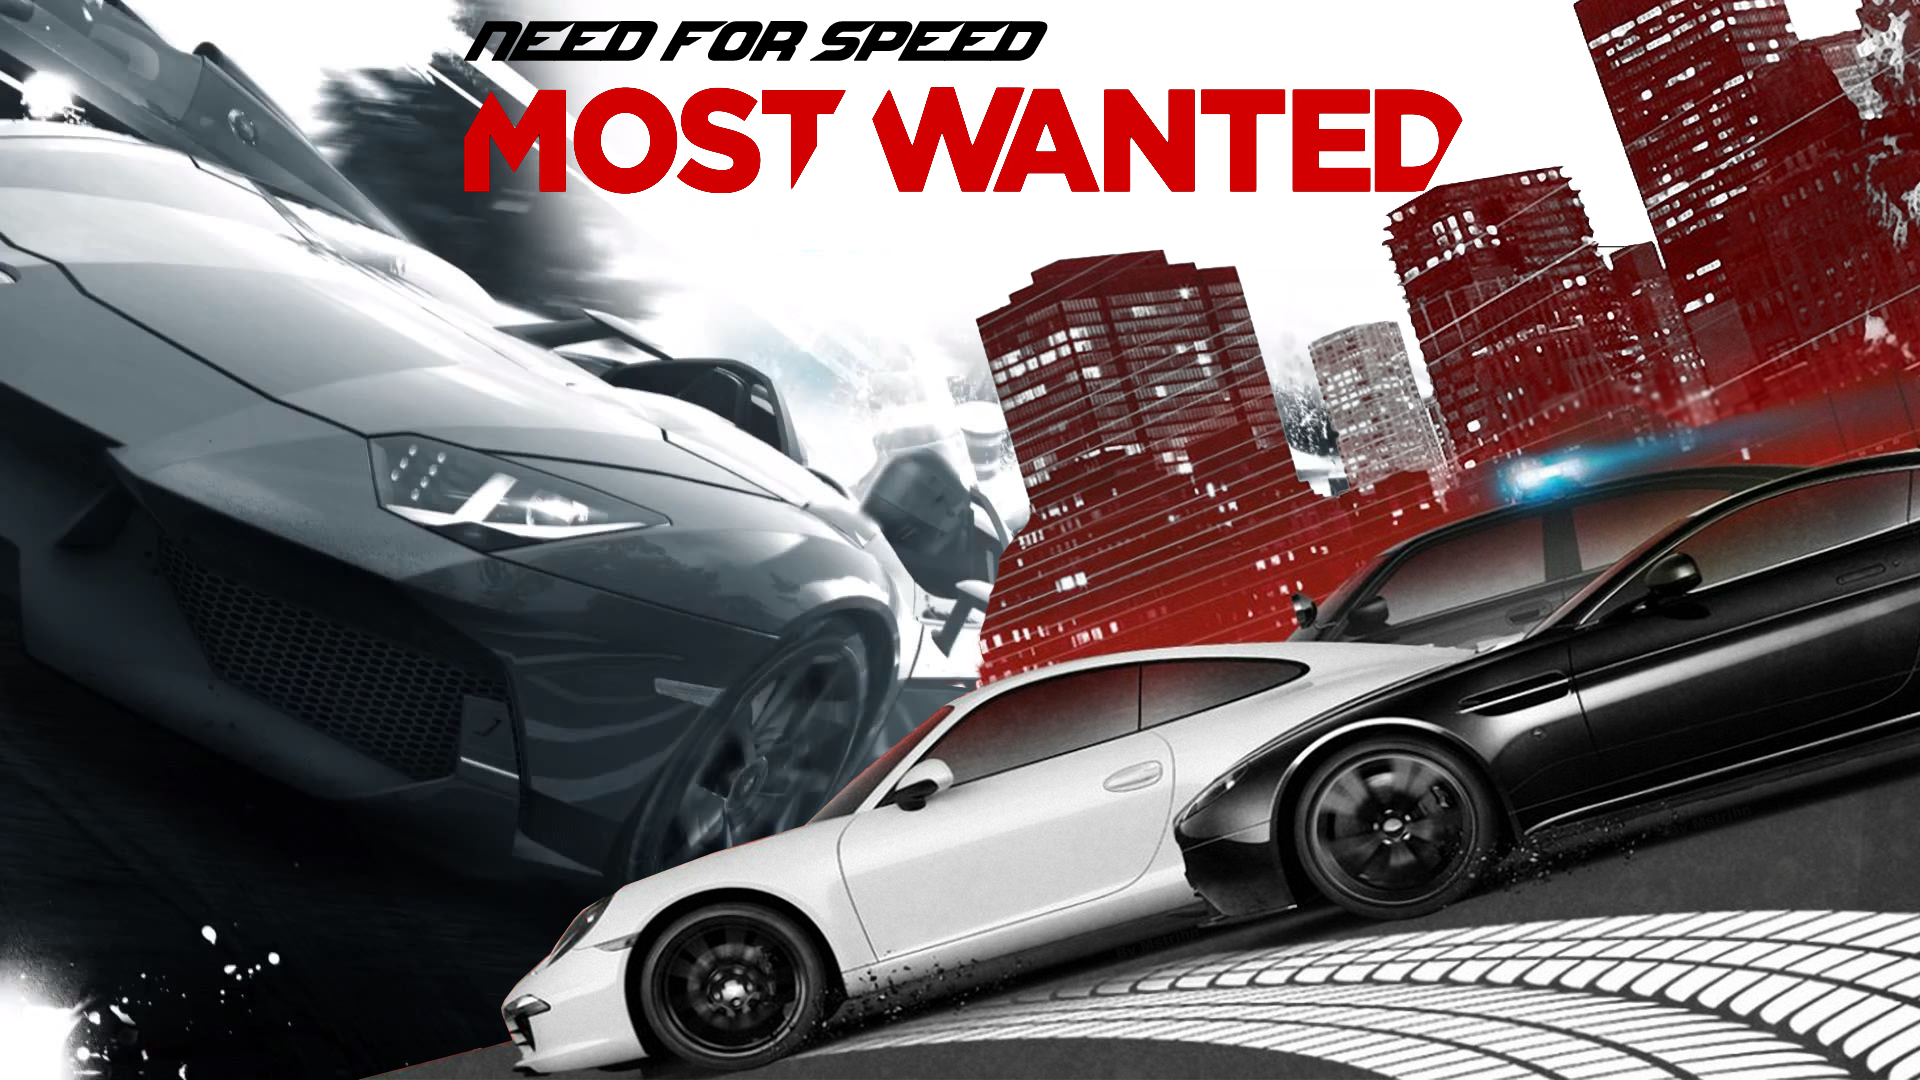 5 6 - Need For Speed ™ Most Wanted , HD Wallpaper & Backgrounds